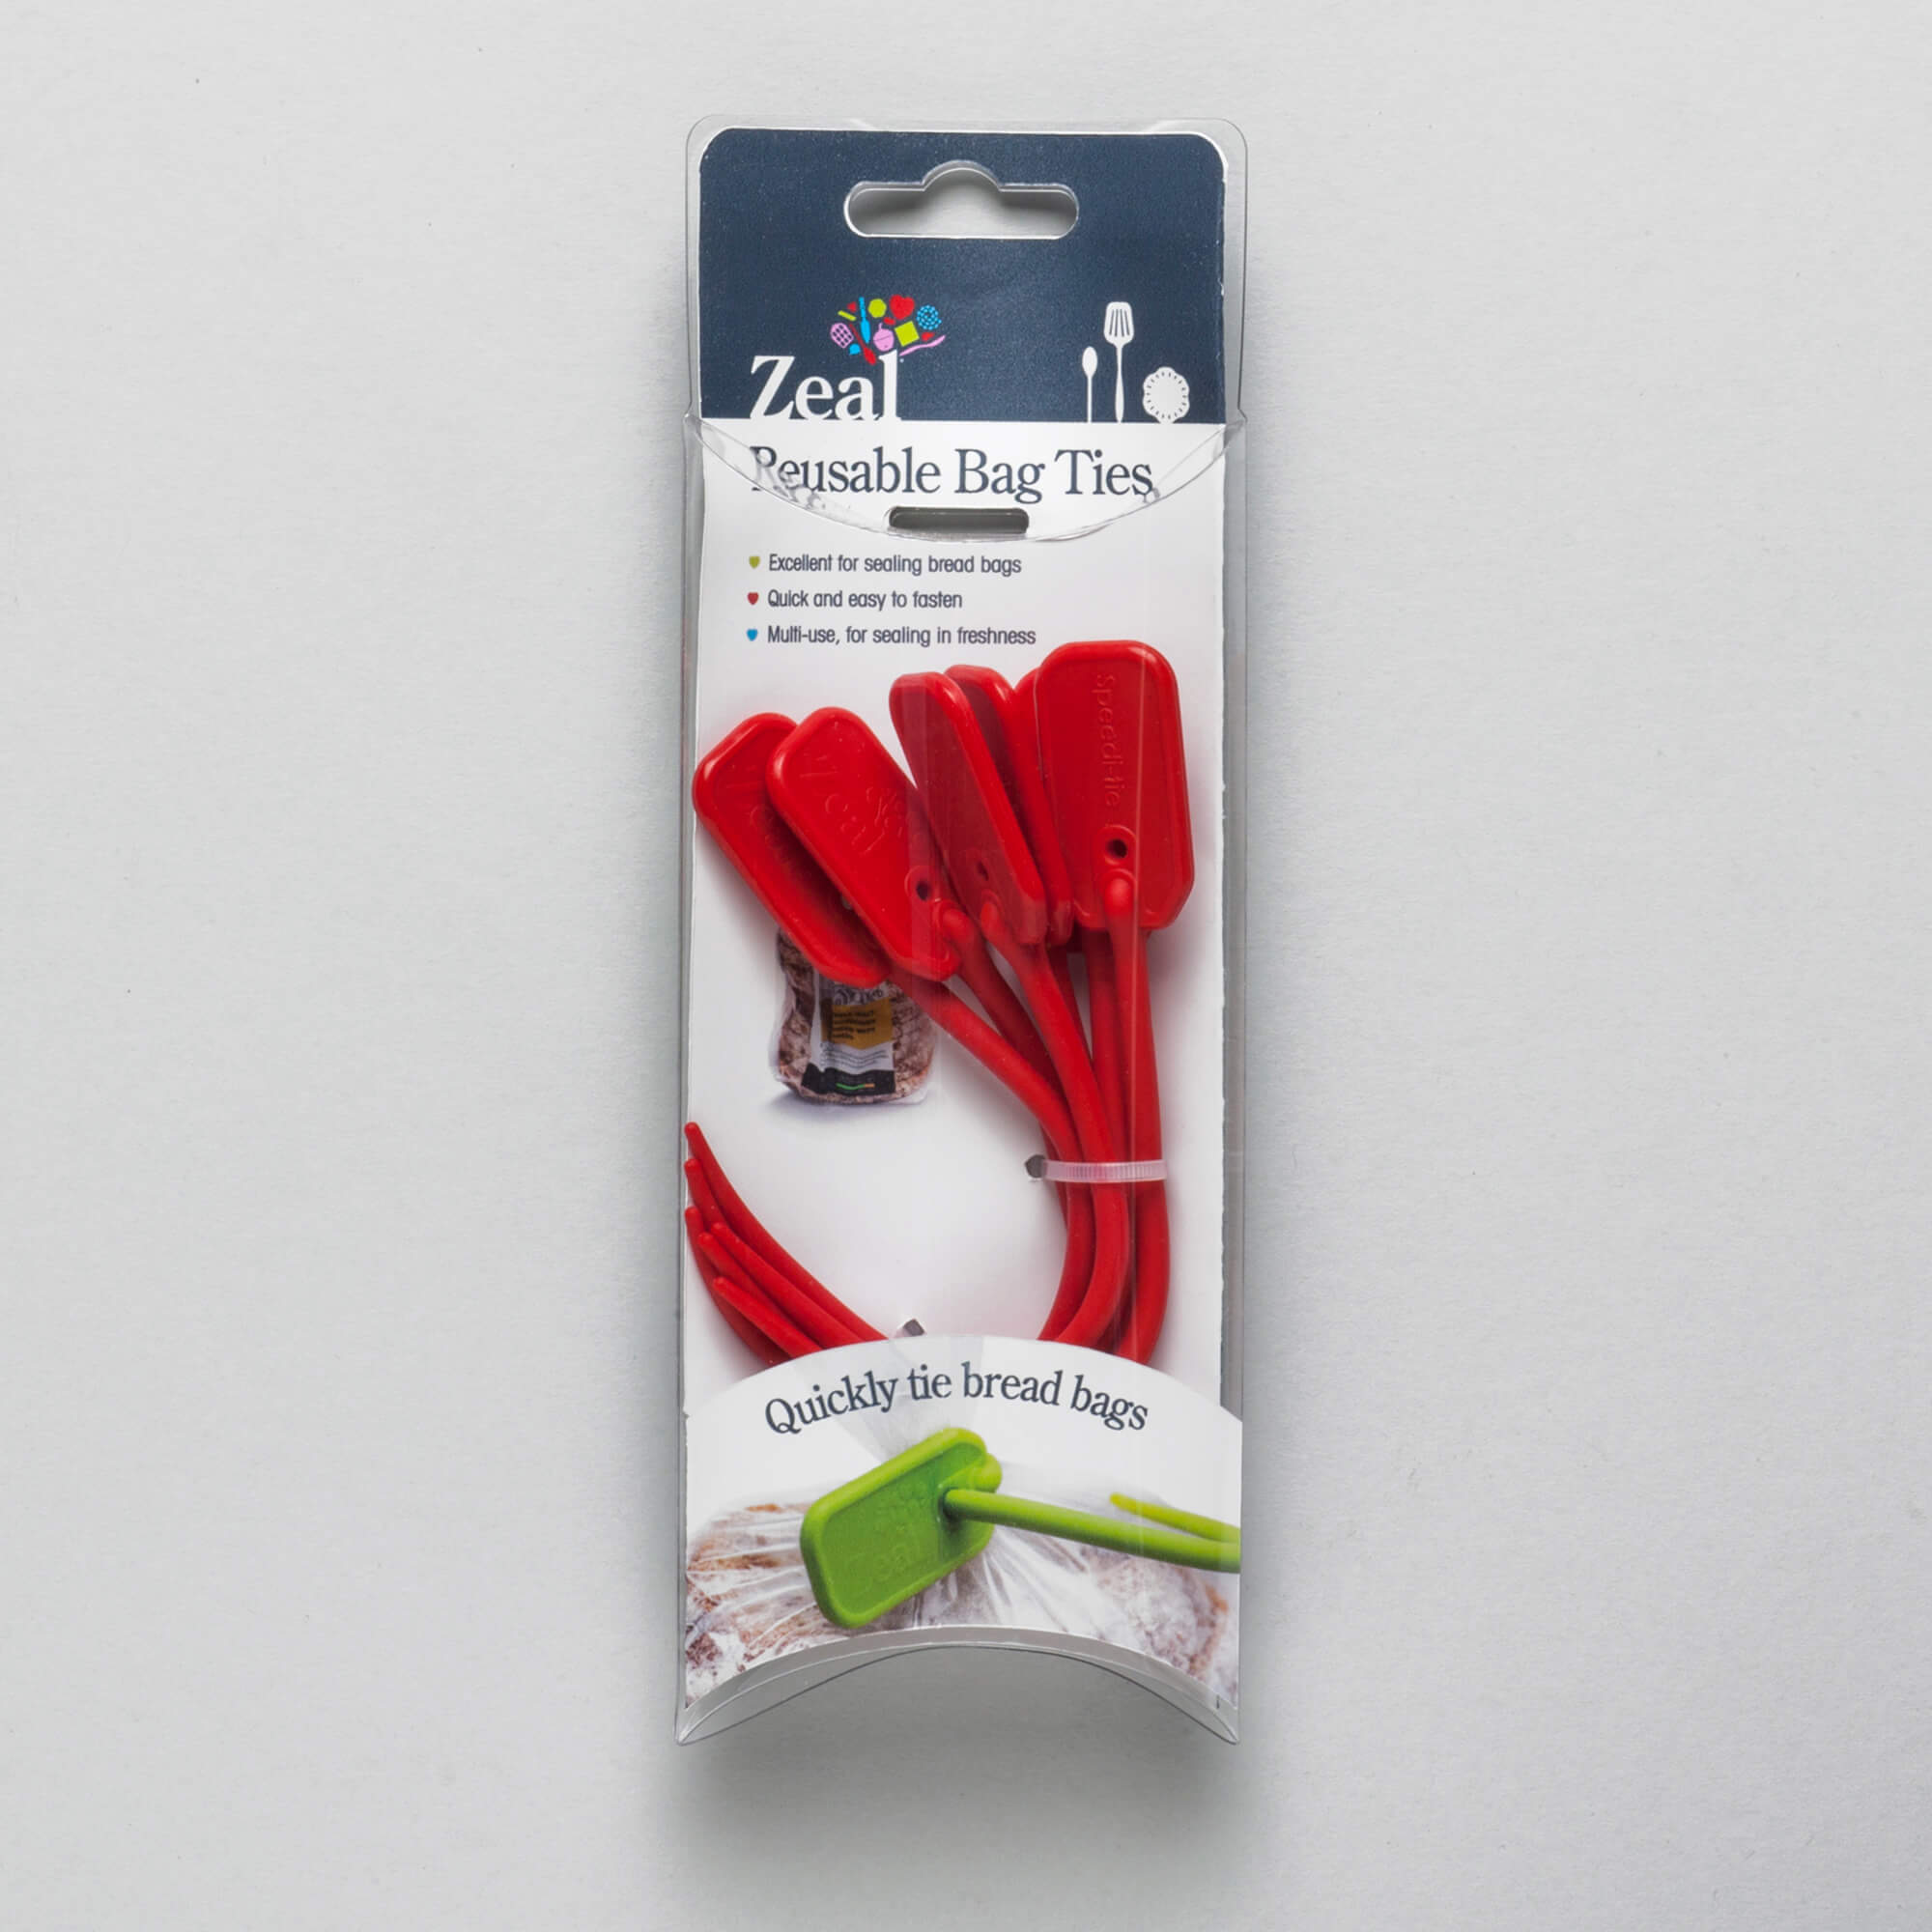 Zeal Silicone Small Bag Ties on a bag in packaging